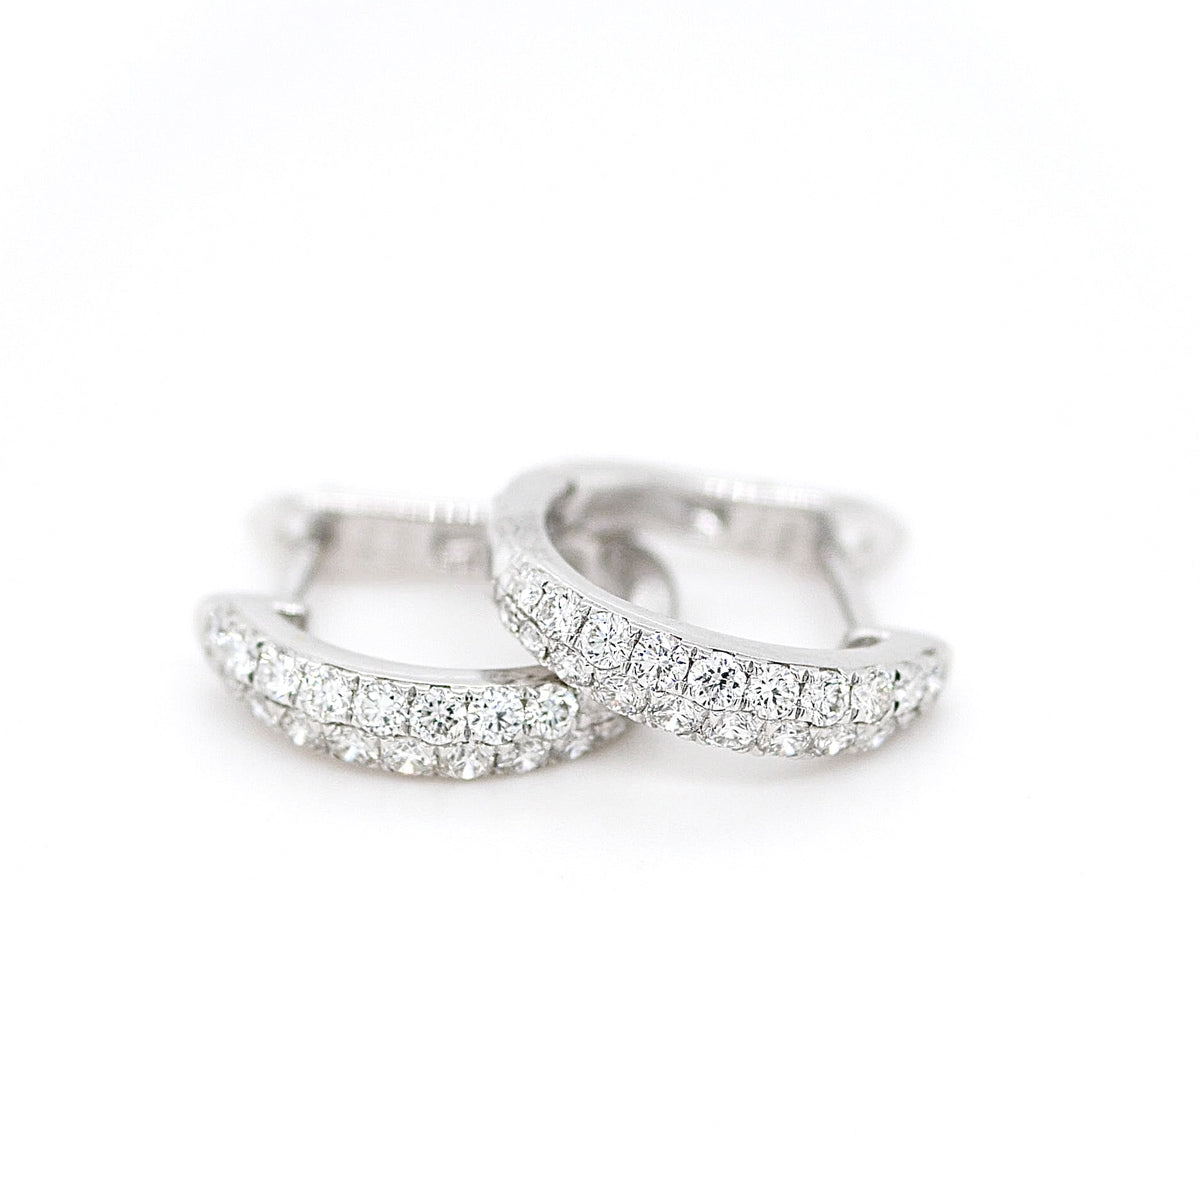 18ct White Gold Pave Set 0.47ct Diamond Tapered Hoop Earrings